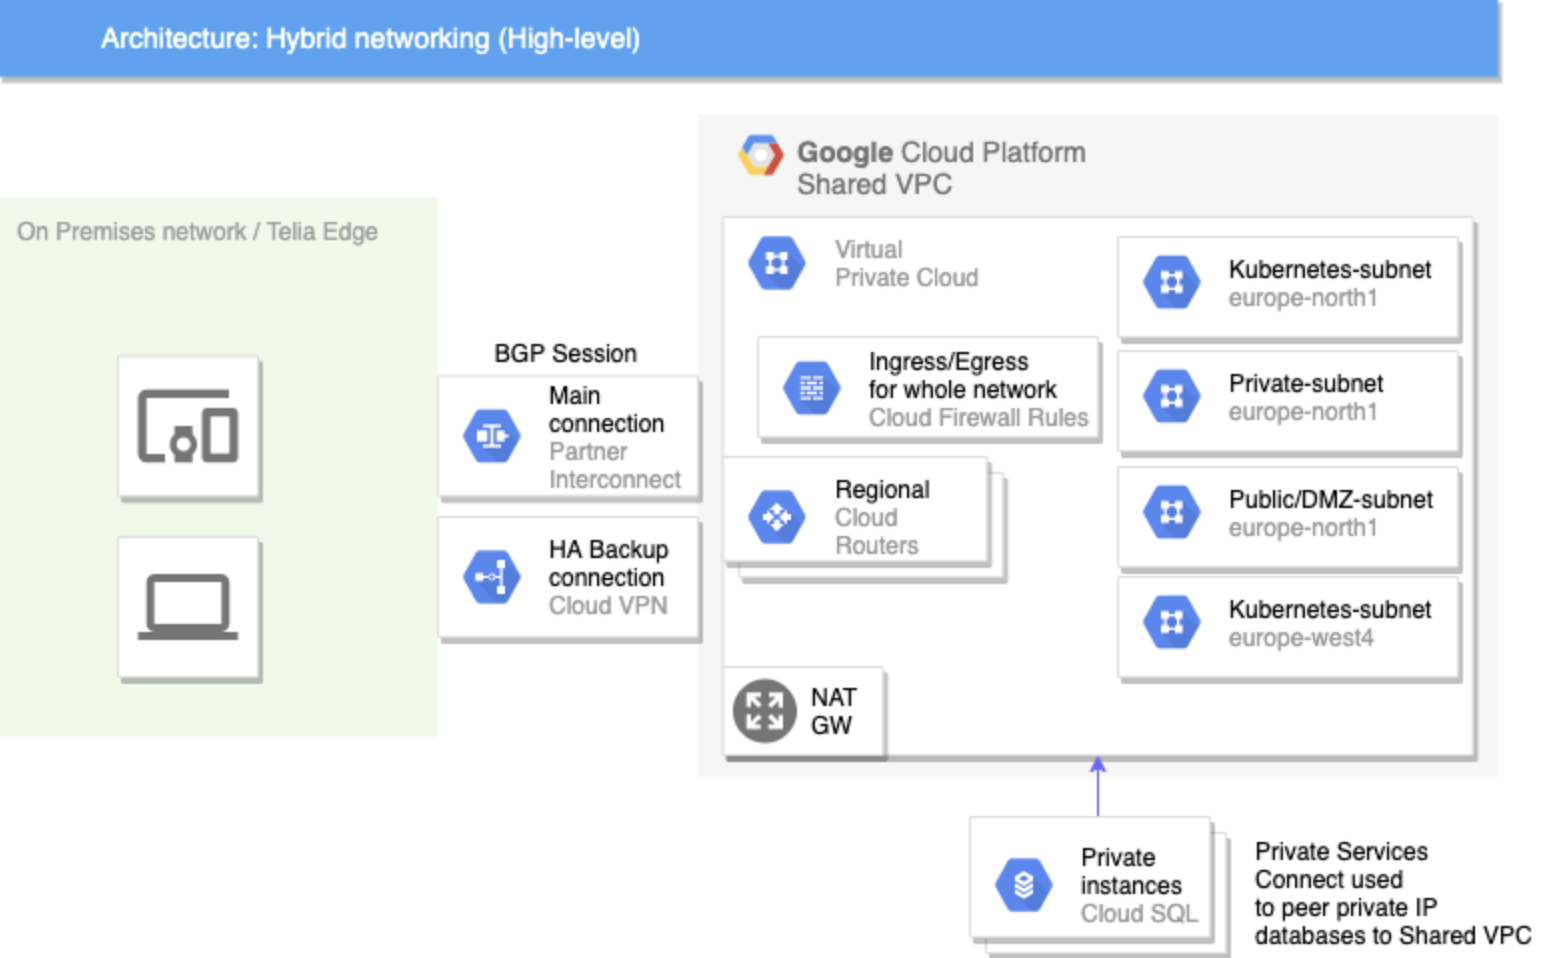 Hybrid model architecture where on-premises and GCP are connected via Interconnect.